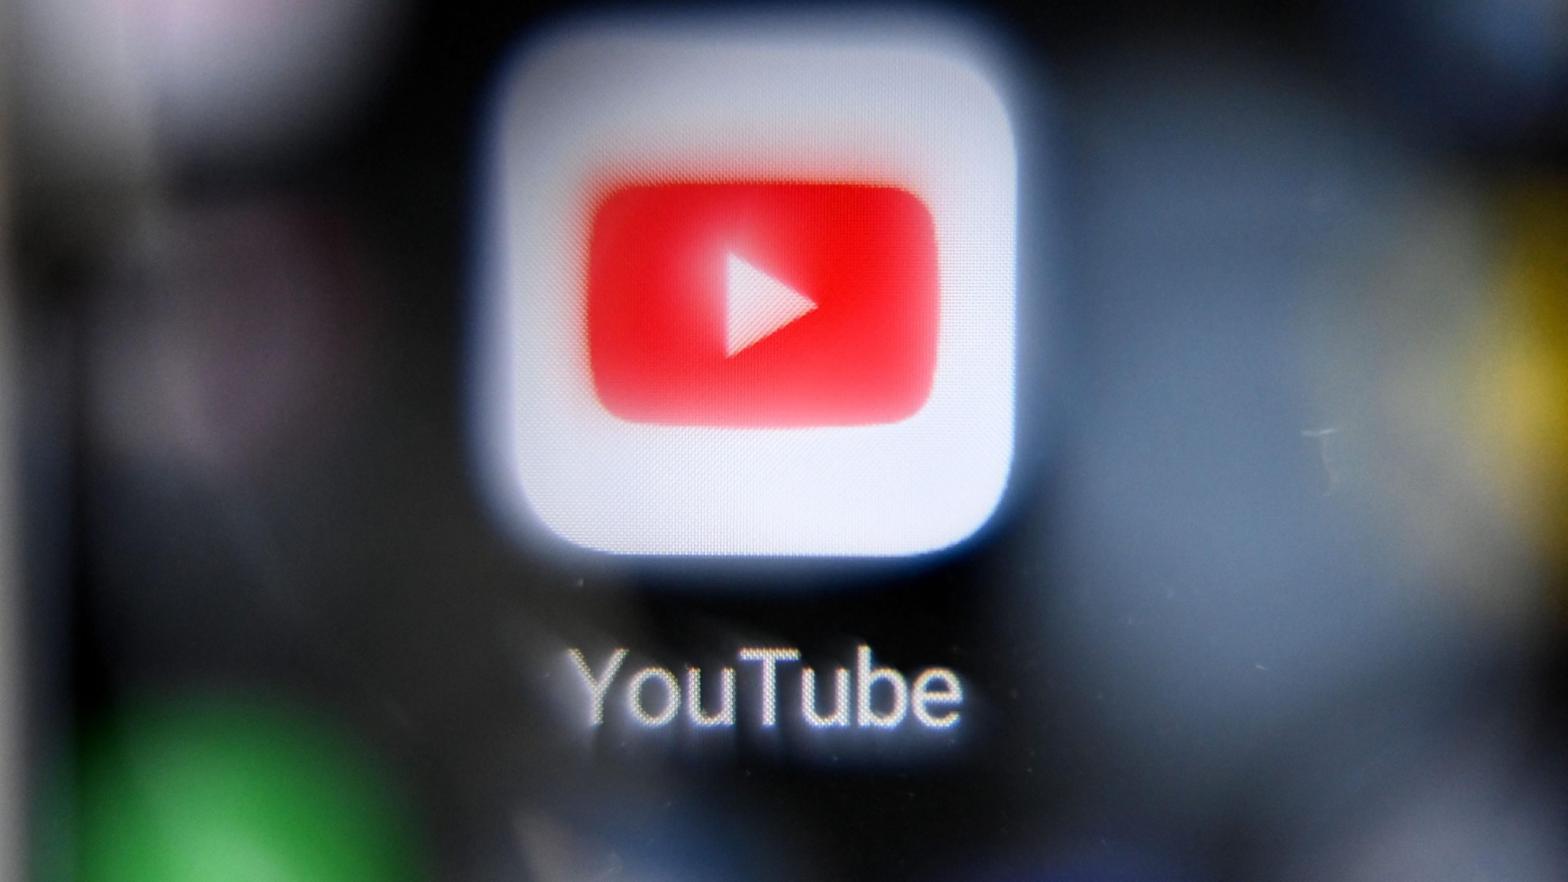 The YouTube logo seen on a smartphone screen on Oct. 12, 2021 in Moscow, used her as stock photo. (Photo: Kirill Kudryavtsev / AFP, AP)